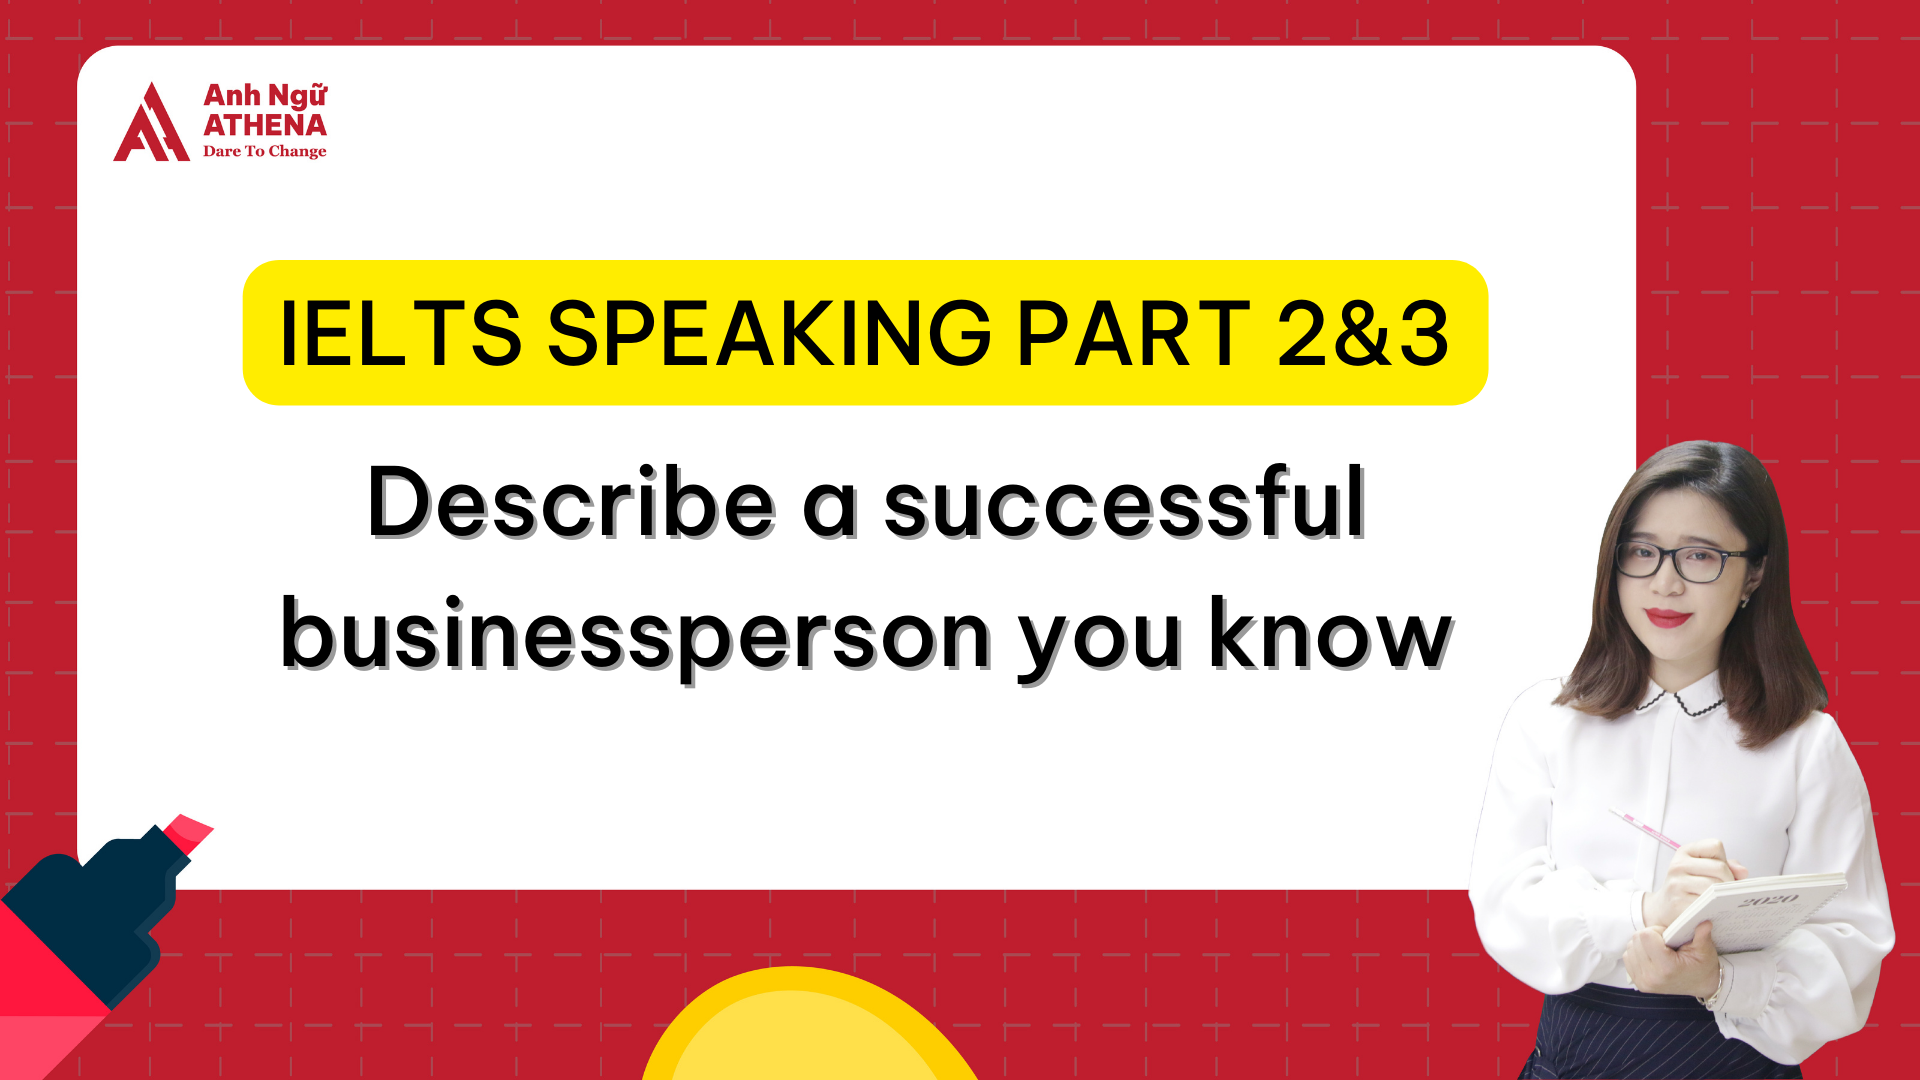 Describe a successful businessperson you know (e.g. running a family business)